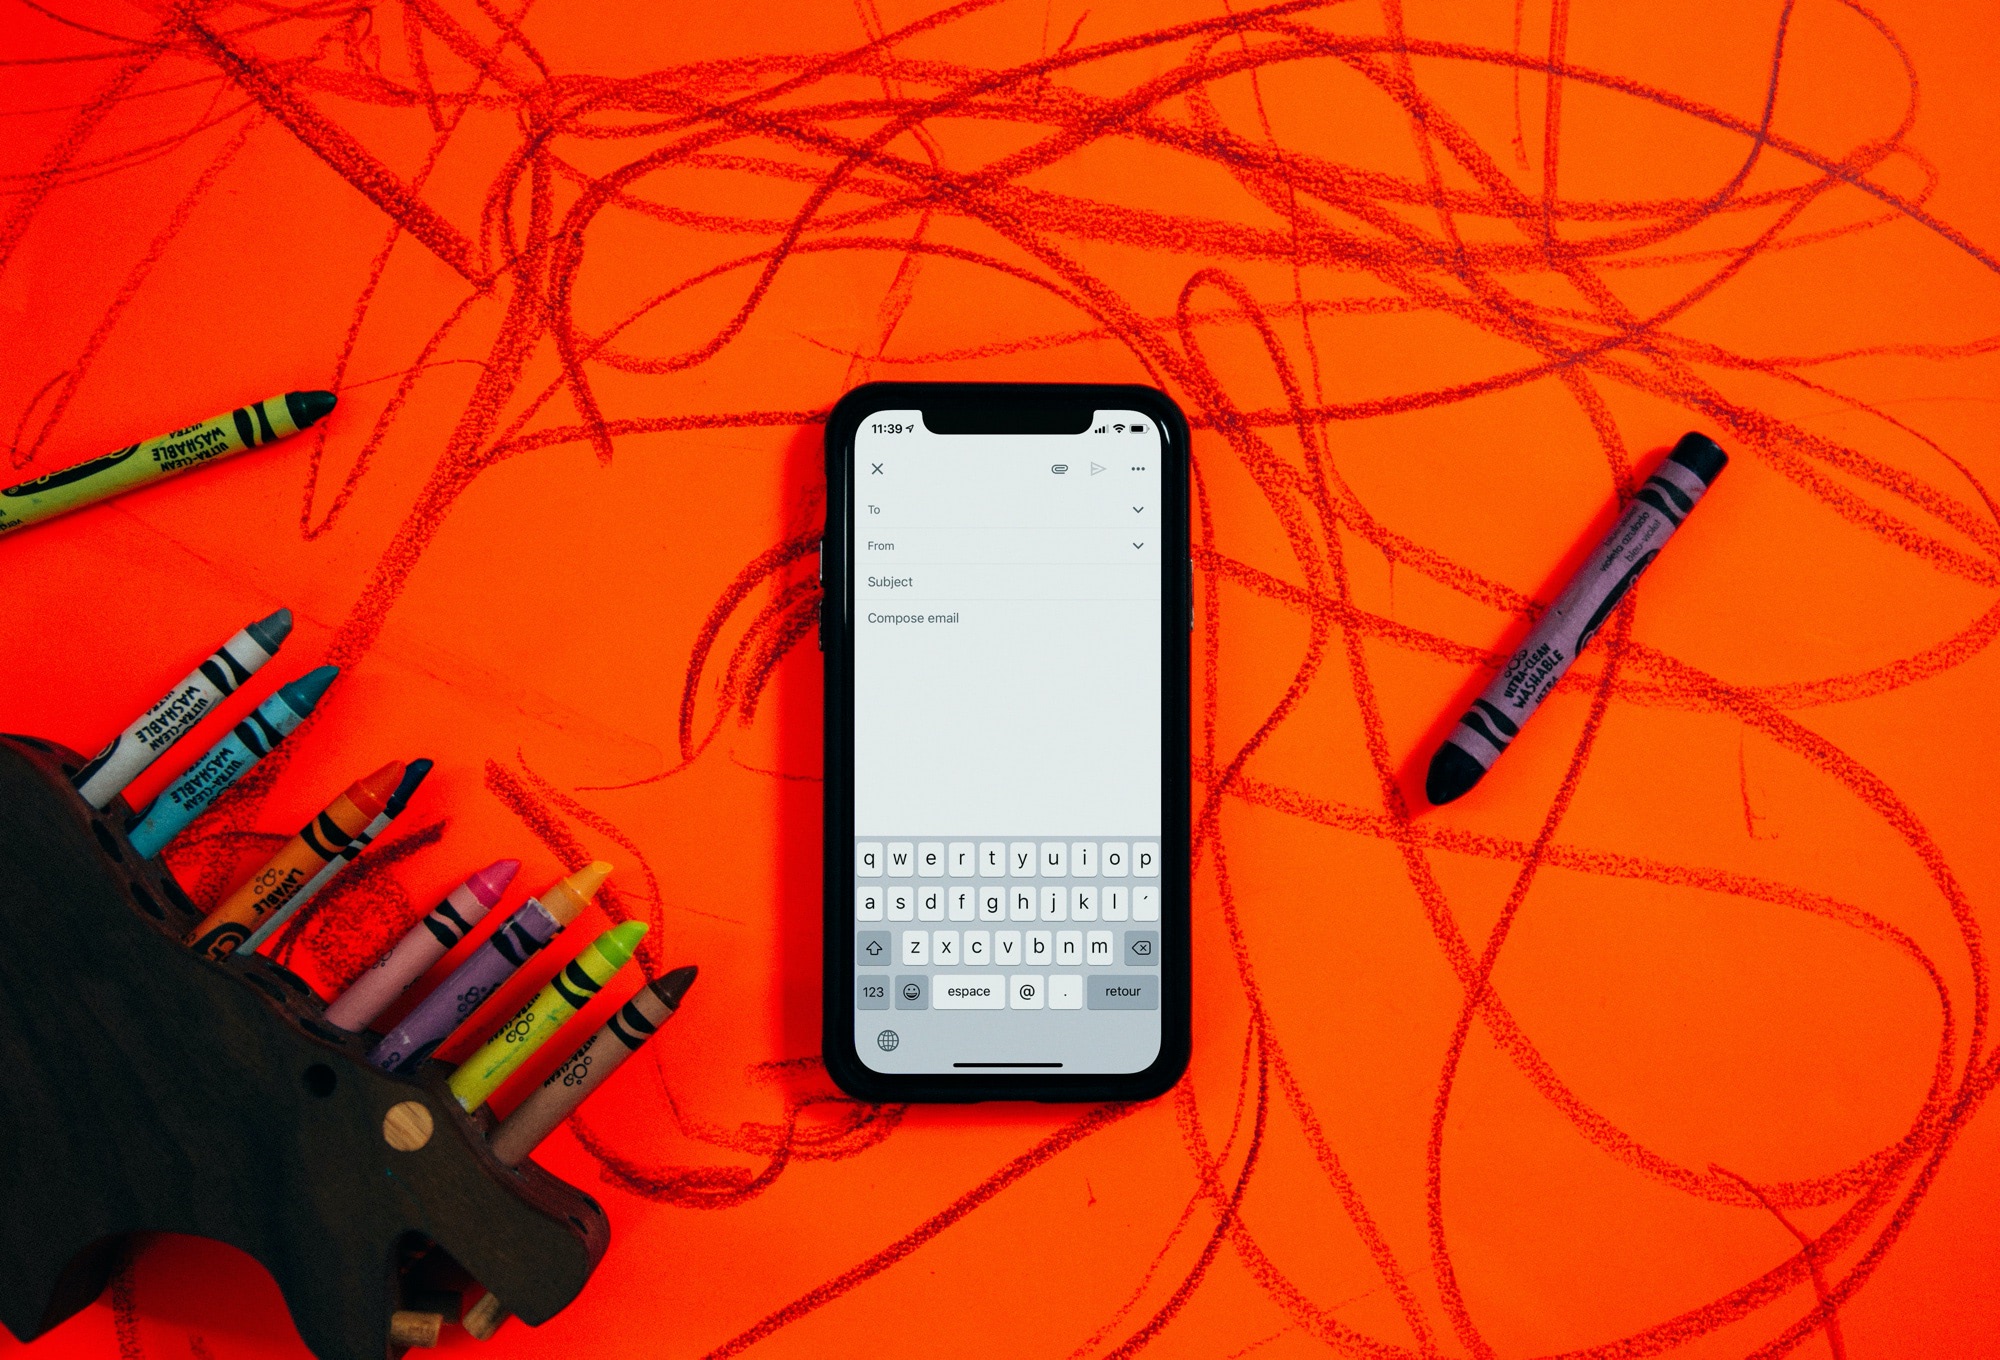 Phone showing an email app resting on a red table covered in crayon drawings